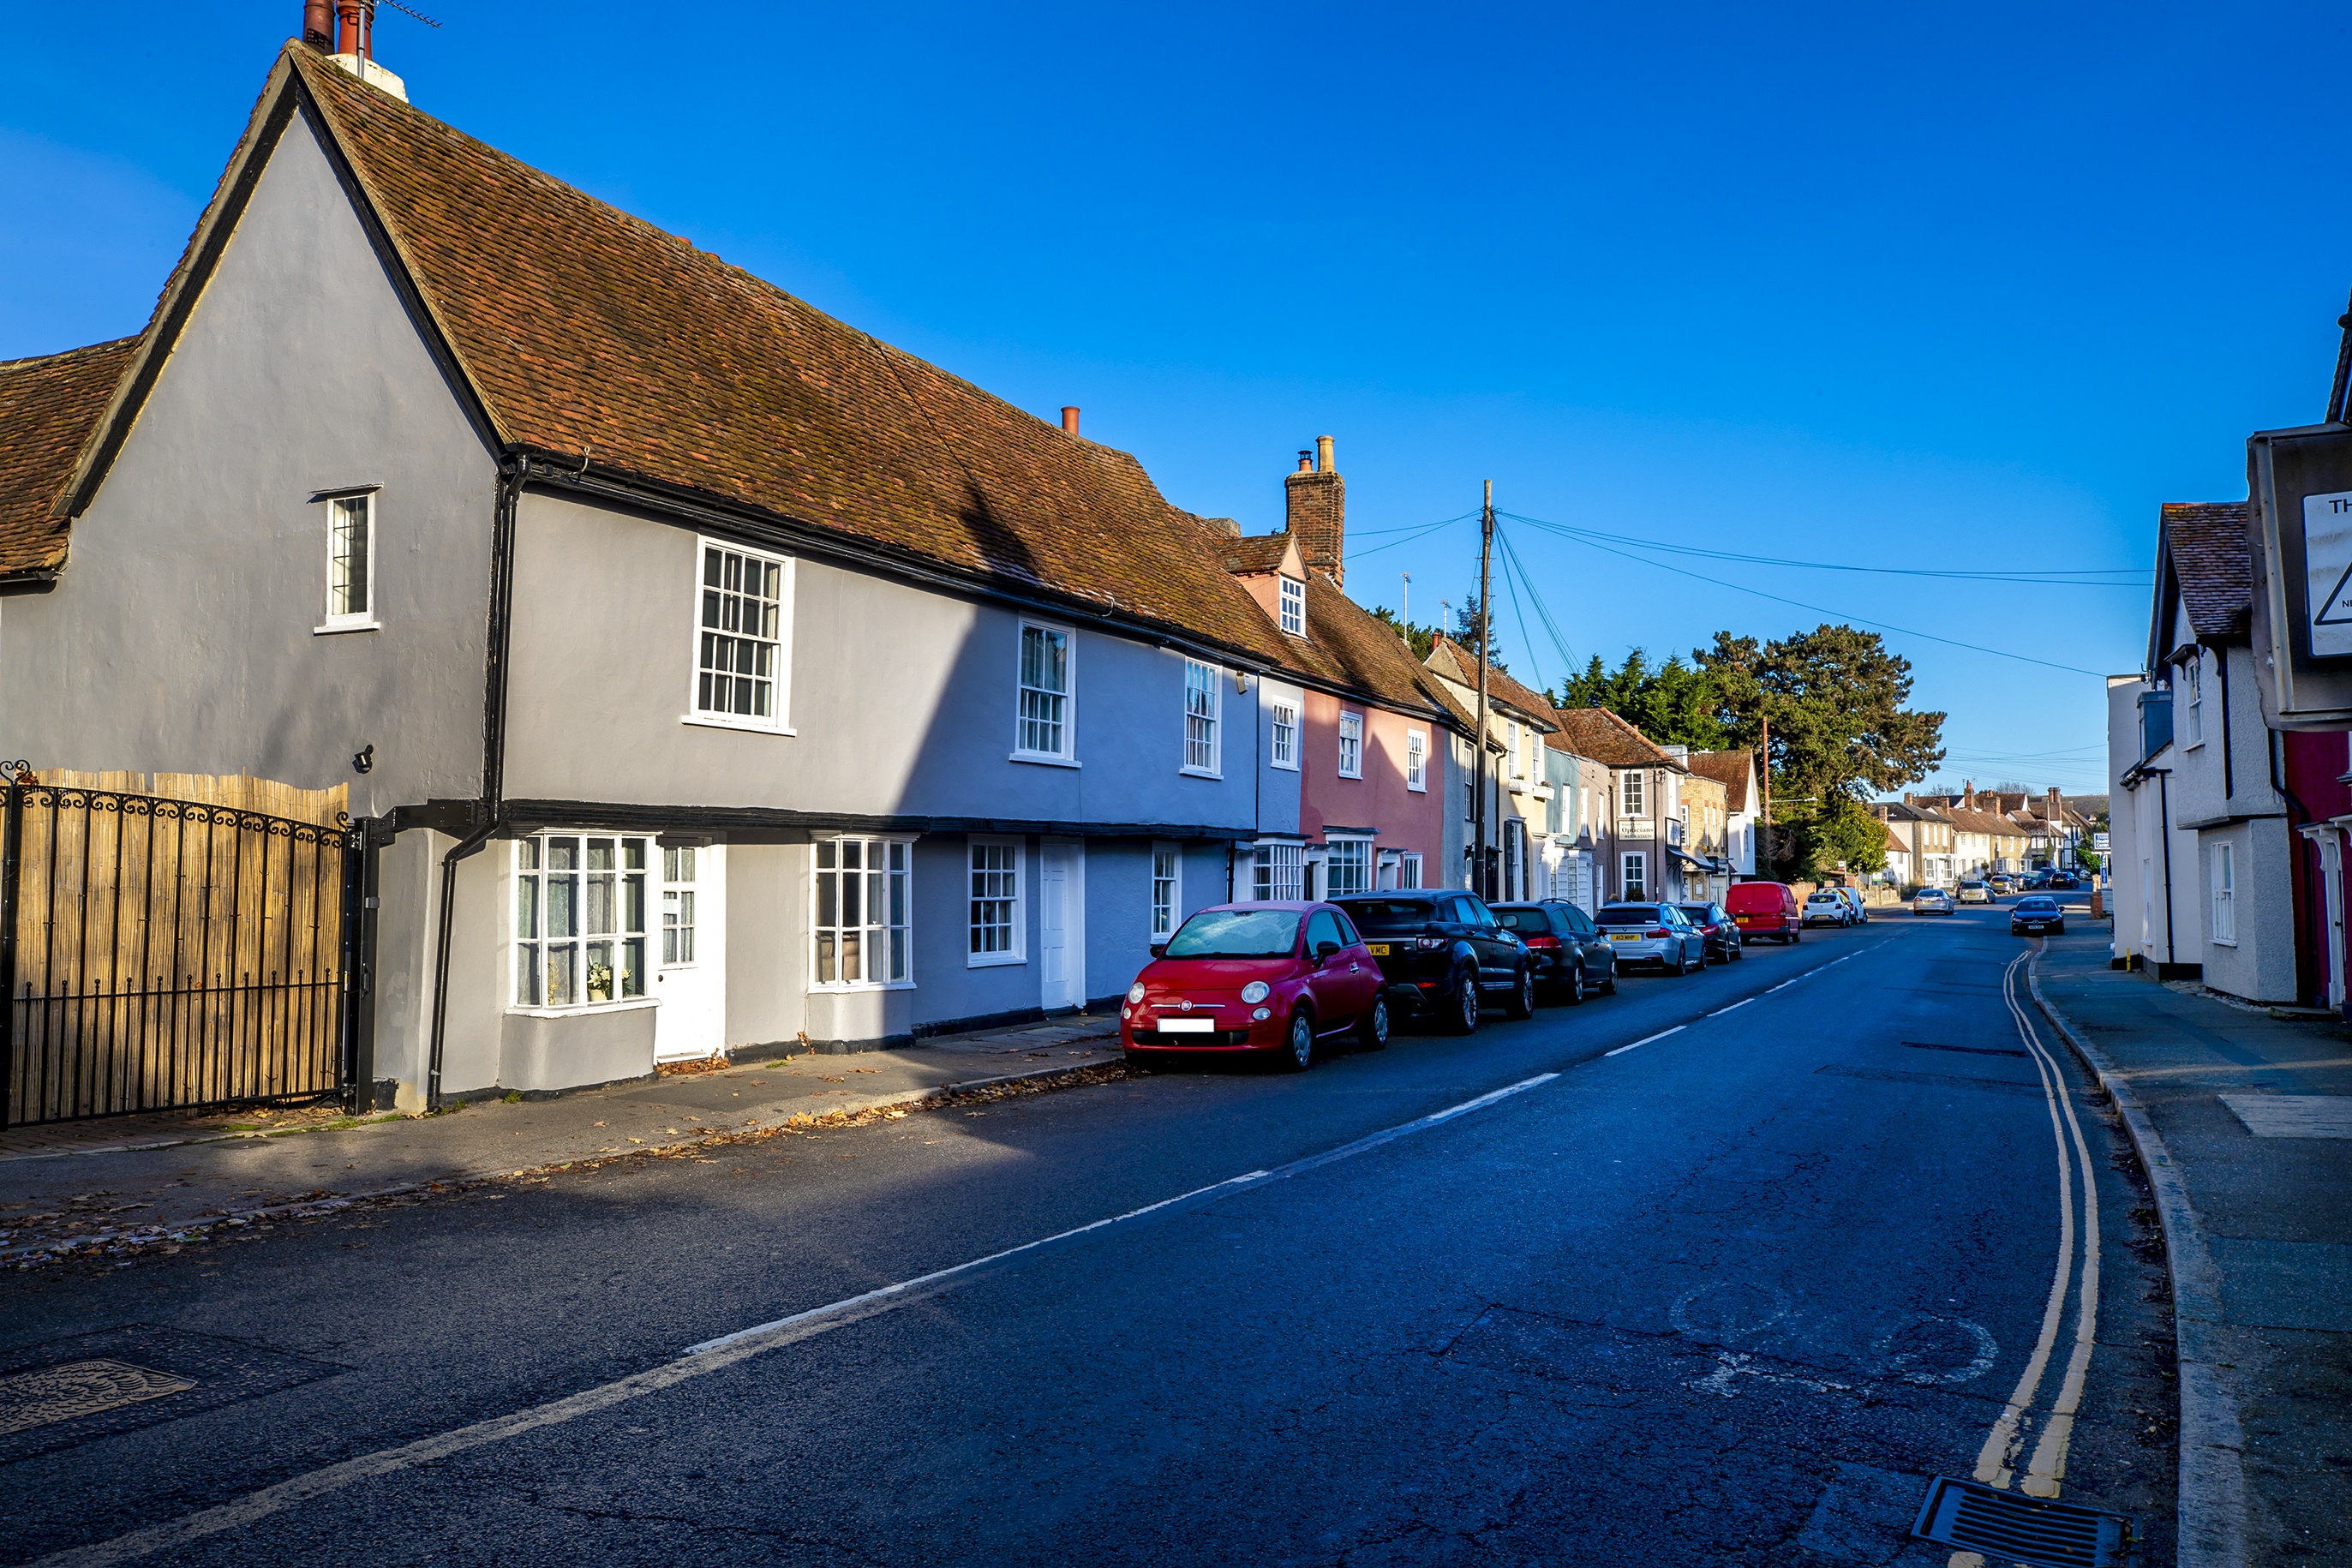 Kelvedon street with cars parked along the road with houses - Image